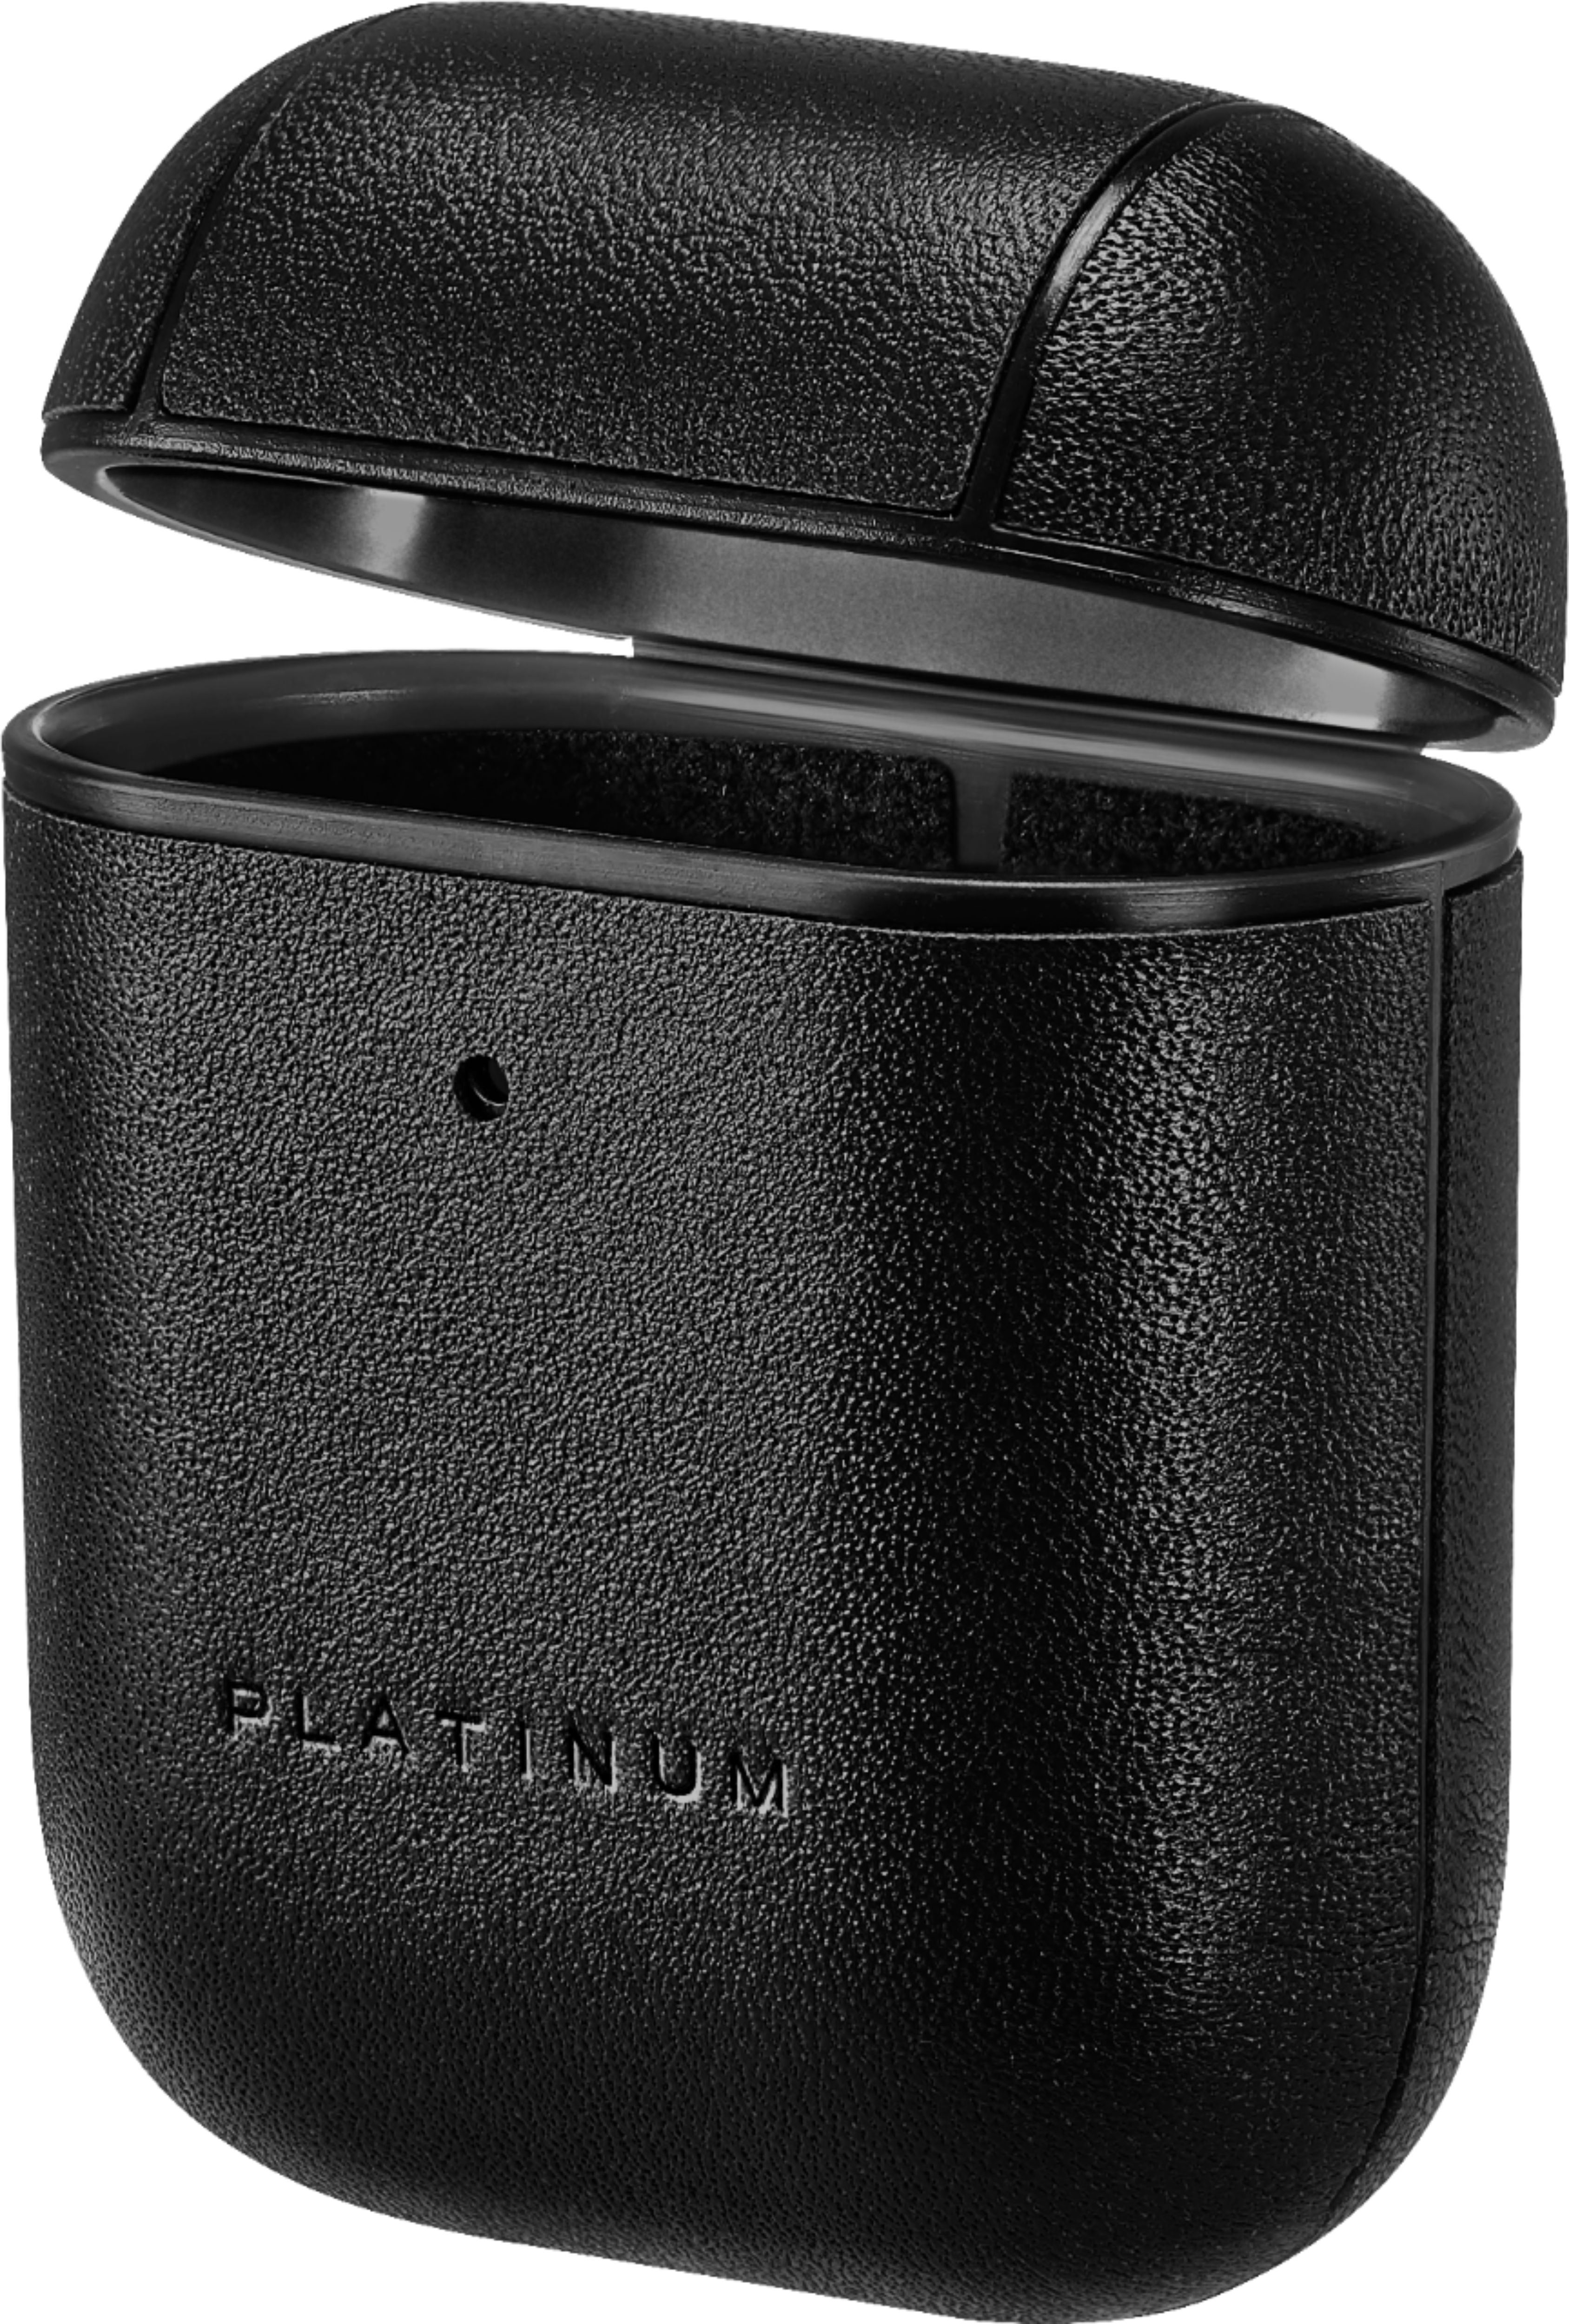 Customer Reviews: Platinum™ Leather Case for Apple AirPods Black PT ...